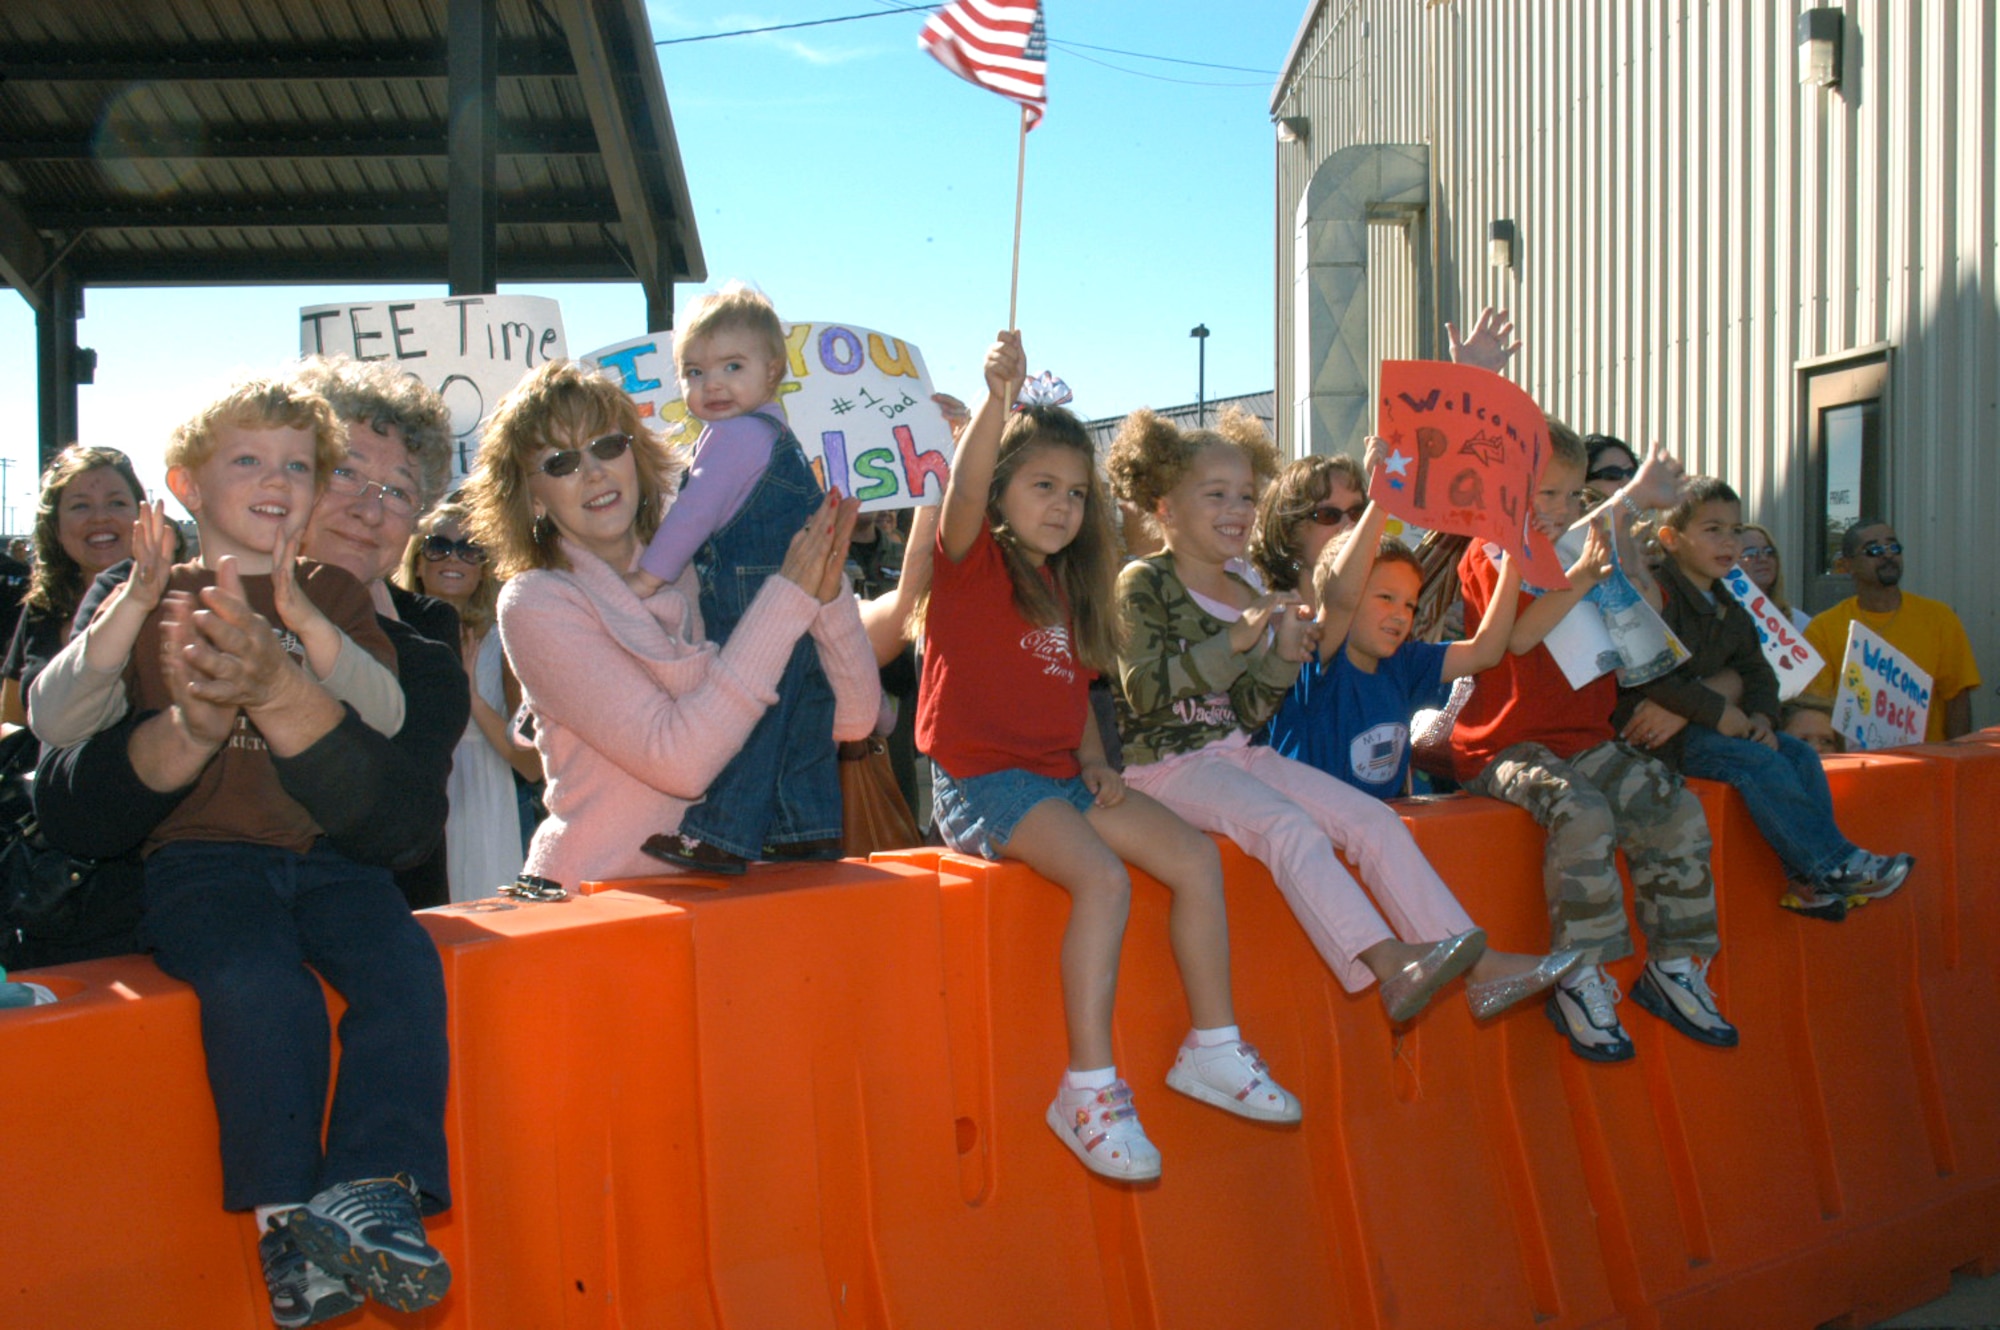 Families wait eagerly for the return of 39th Airlift Squadron and 317th Airlift Group personnel who arrived back at Dyess Oct. 20 from Southwest Asia. The 39th and 40th Airlift Squadrons are on a four-month alternating rotation from Dyess. Since 9/11, they have been fighting the Global War on Terror and providing humanitarian relief in Iraq, Afghanistan, and the Horn of Africa.  (U.S. Air Force photo by Senior Airman Carolyn Viss)